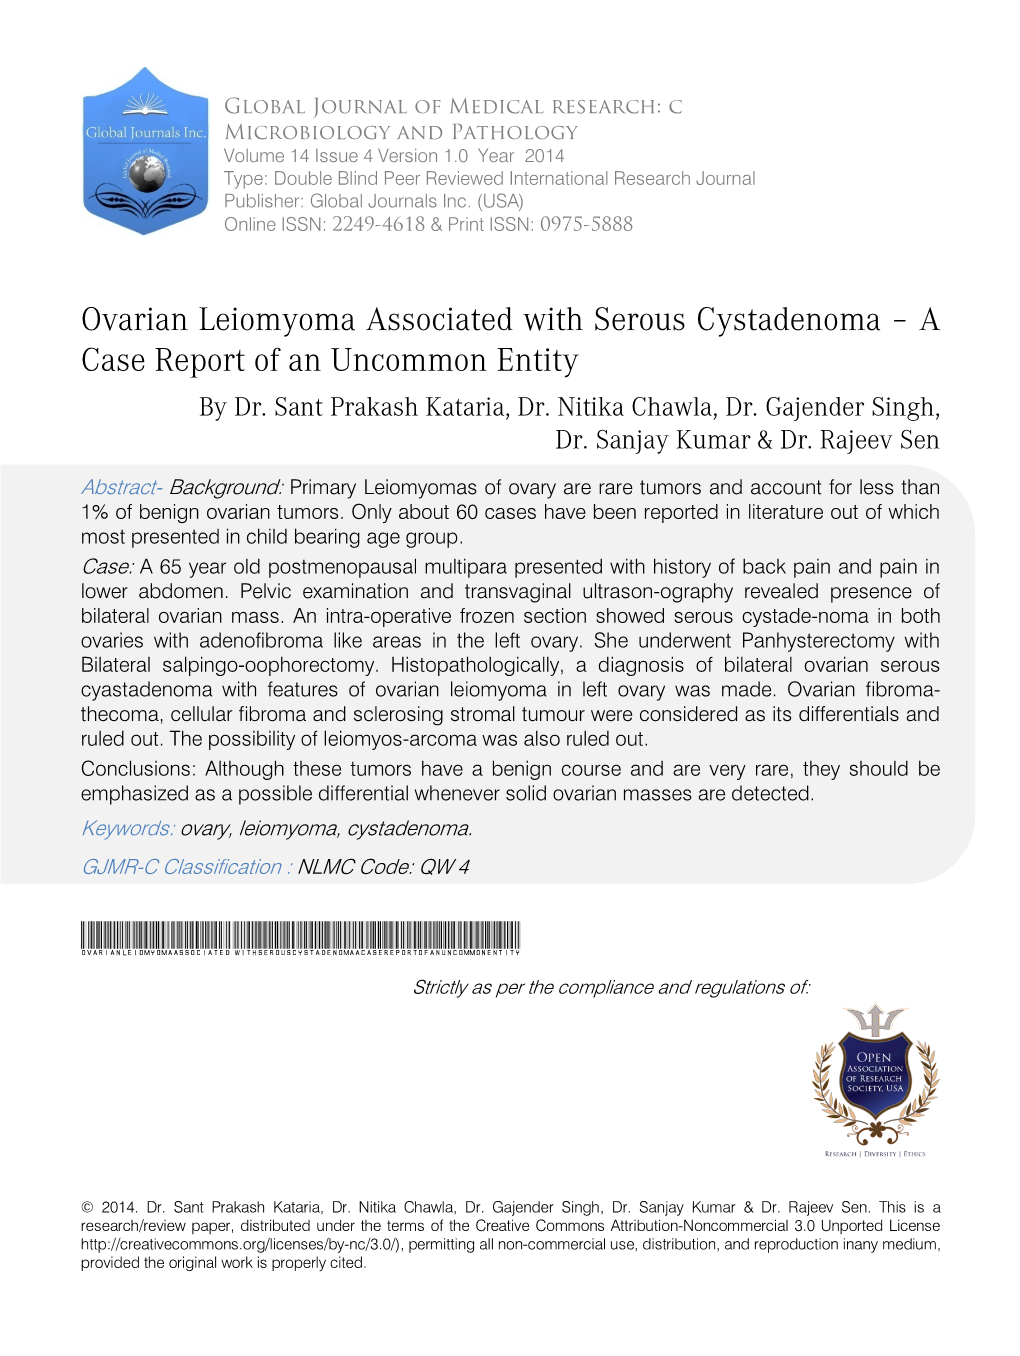 Ovarian Leiomyoma Associated with Serous Cystadenoma – a Case Report of an Uncommon Entity by Dr